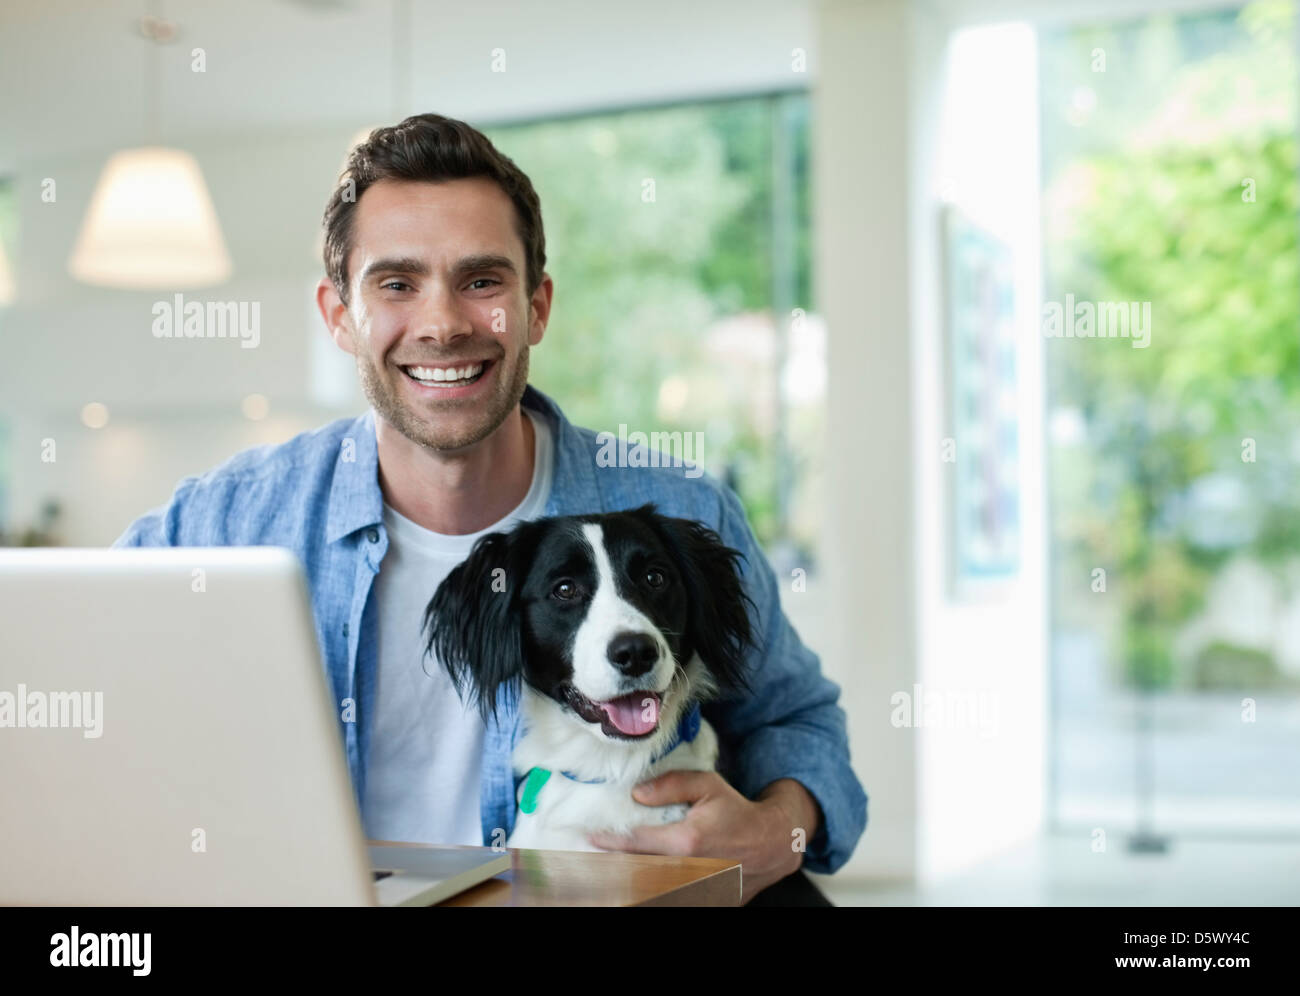 Man with dog using laptop in kitchen Stock Photo